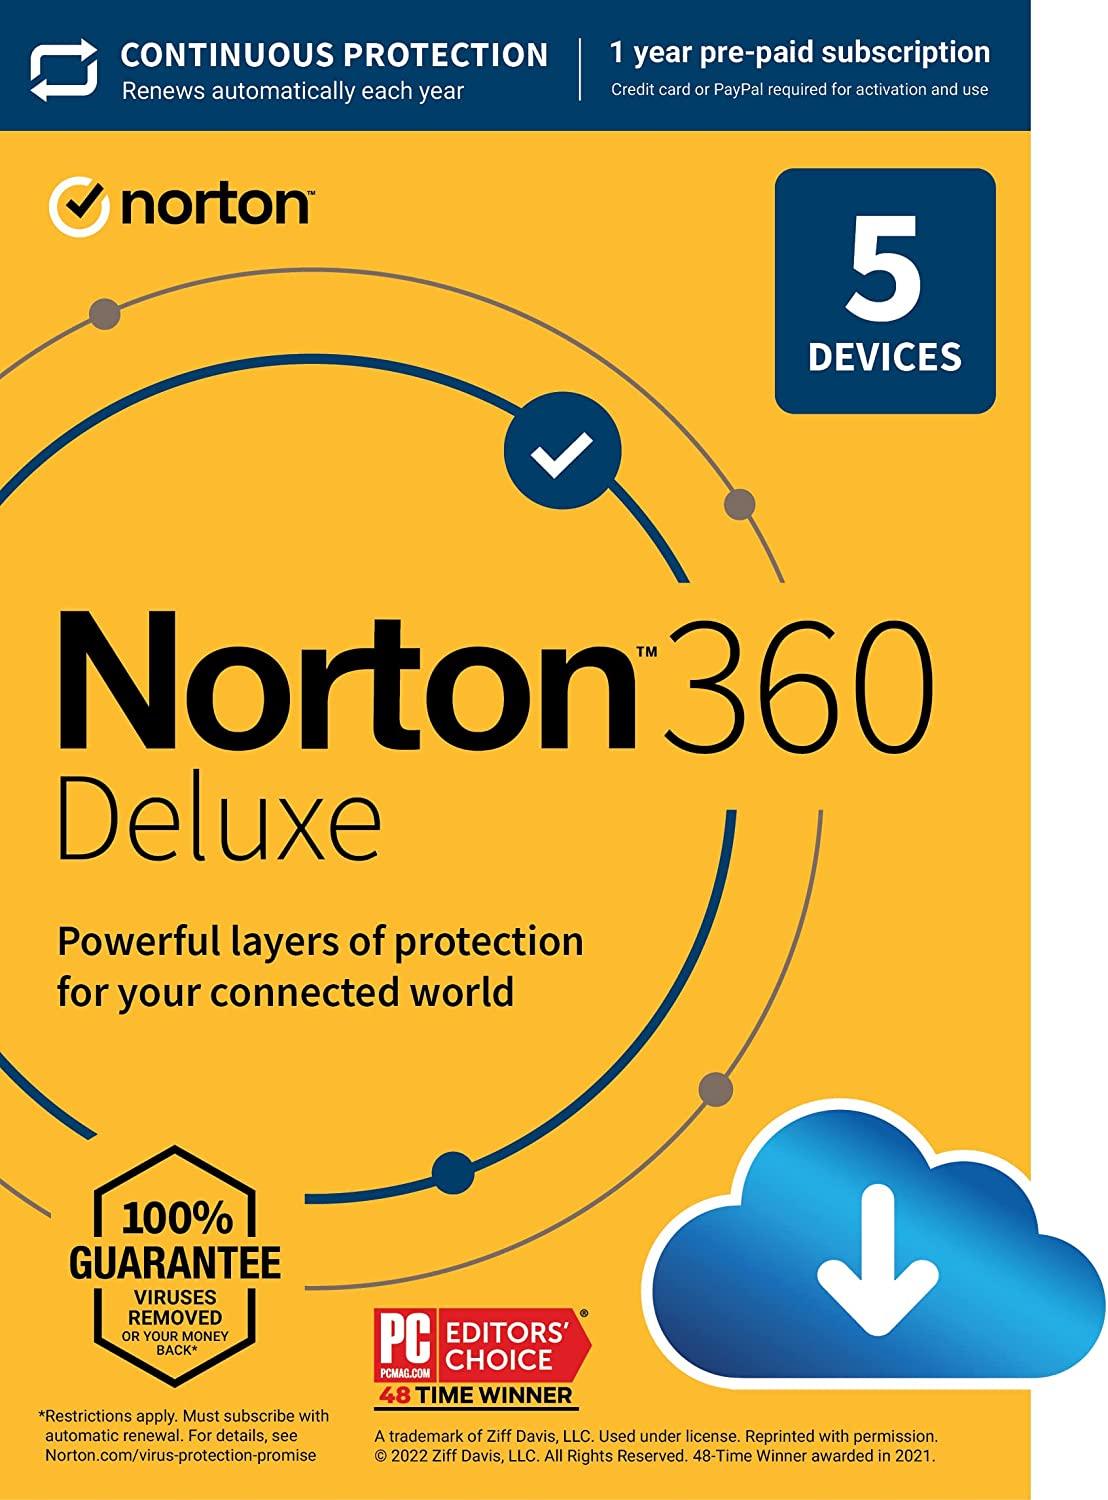 Norton 360 Deluxe, 2023 Ready, Antivirus software for 5 Devices - My Store